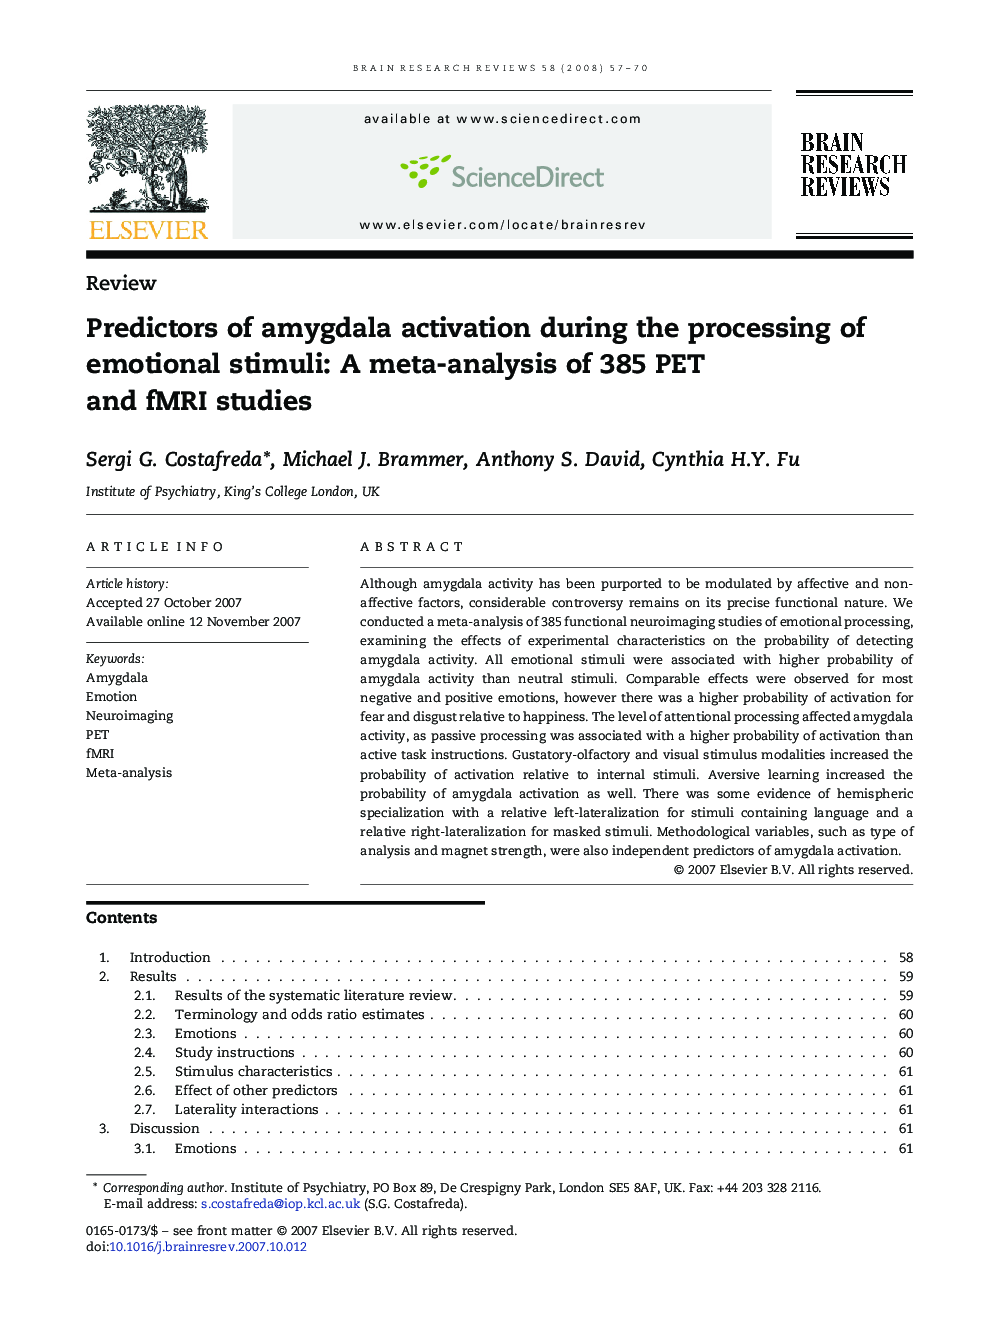 Predictors of amygdala activation during the processing of emotional stimuli: A meta-analysis of 385 PET and fMRI studies